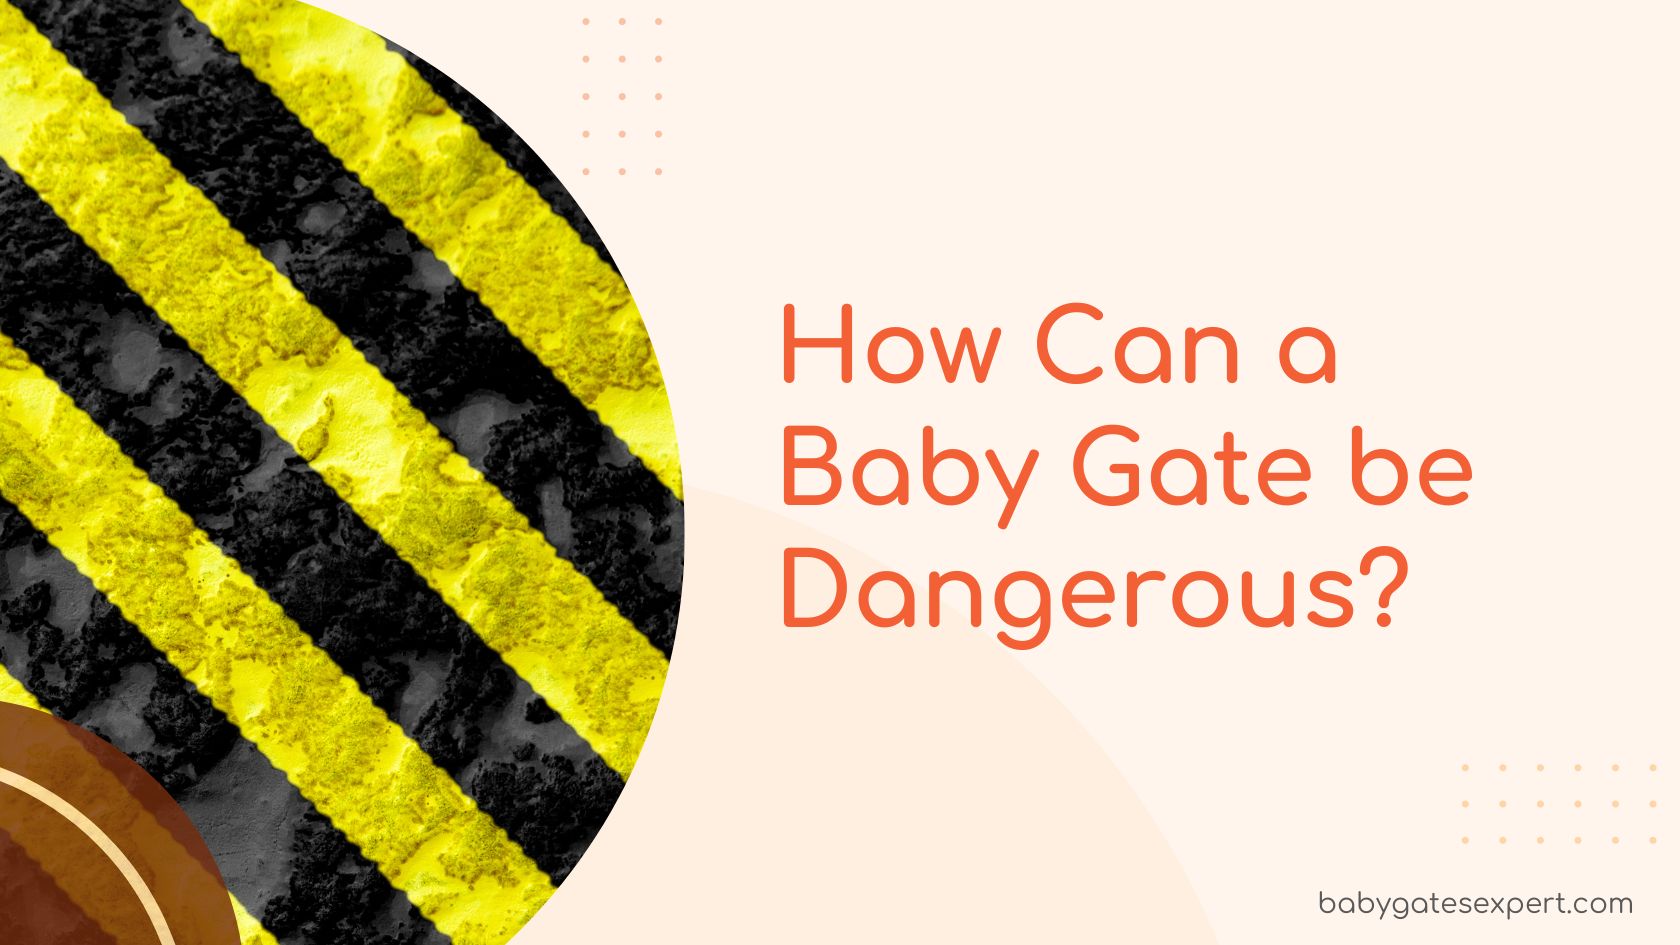 How Can a Baby Gate be Dangerous?